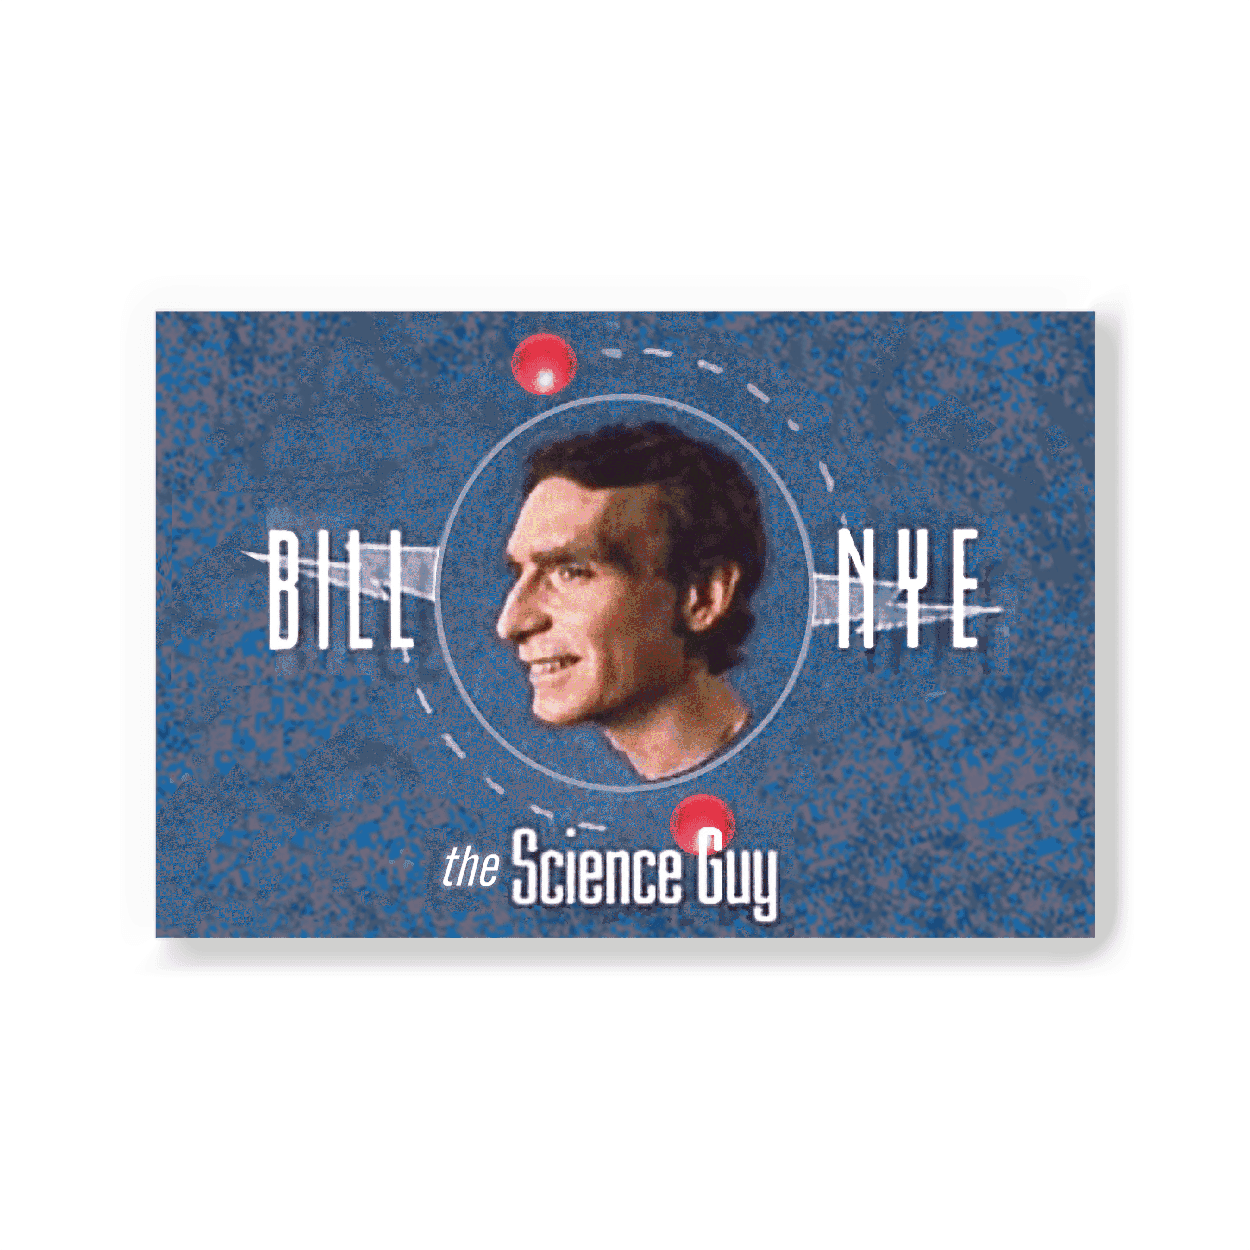 Bill Nye, the Science Guy - 2x3 Magnet